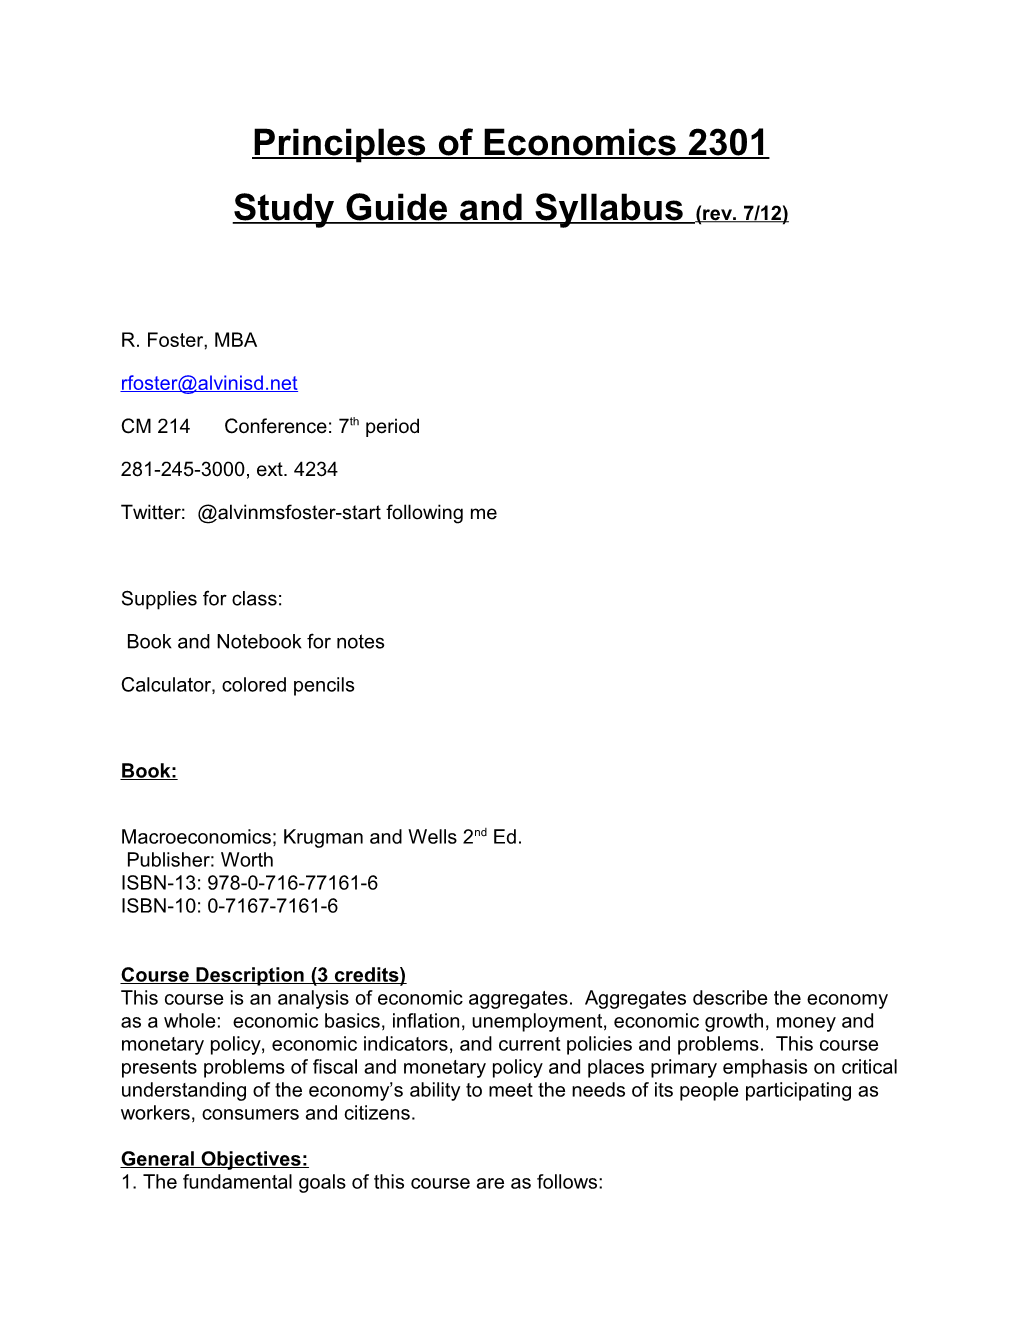 Study Guide and Syllabus(Rev. 7/12)